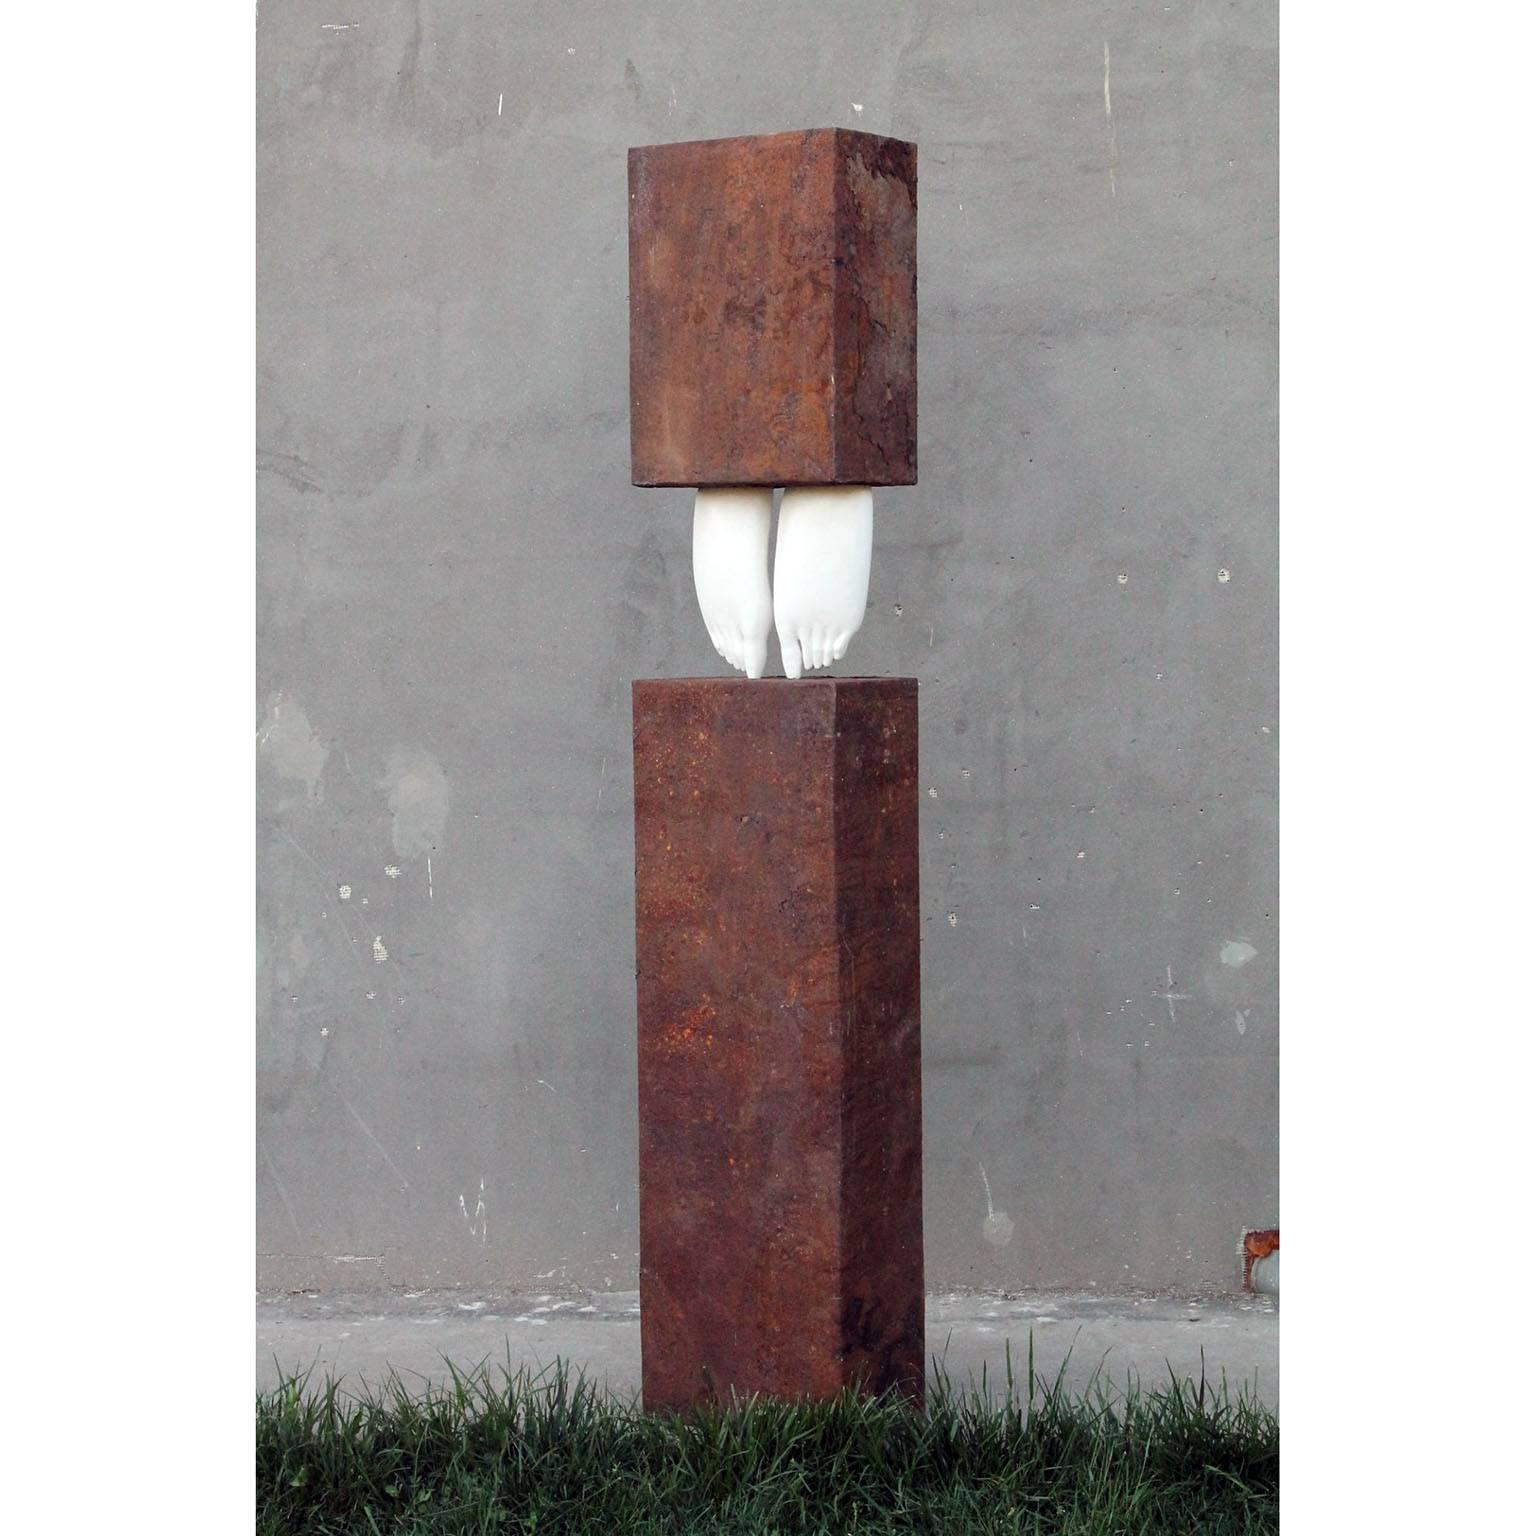 Moderne Sculpture contemporaine, TOTEM «wn to Earth » (Down to Earth), 2015 en vente